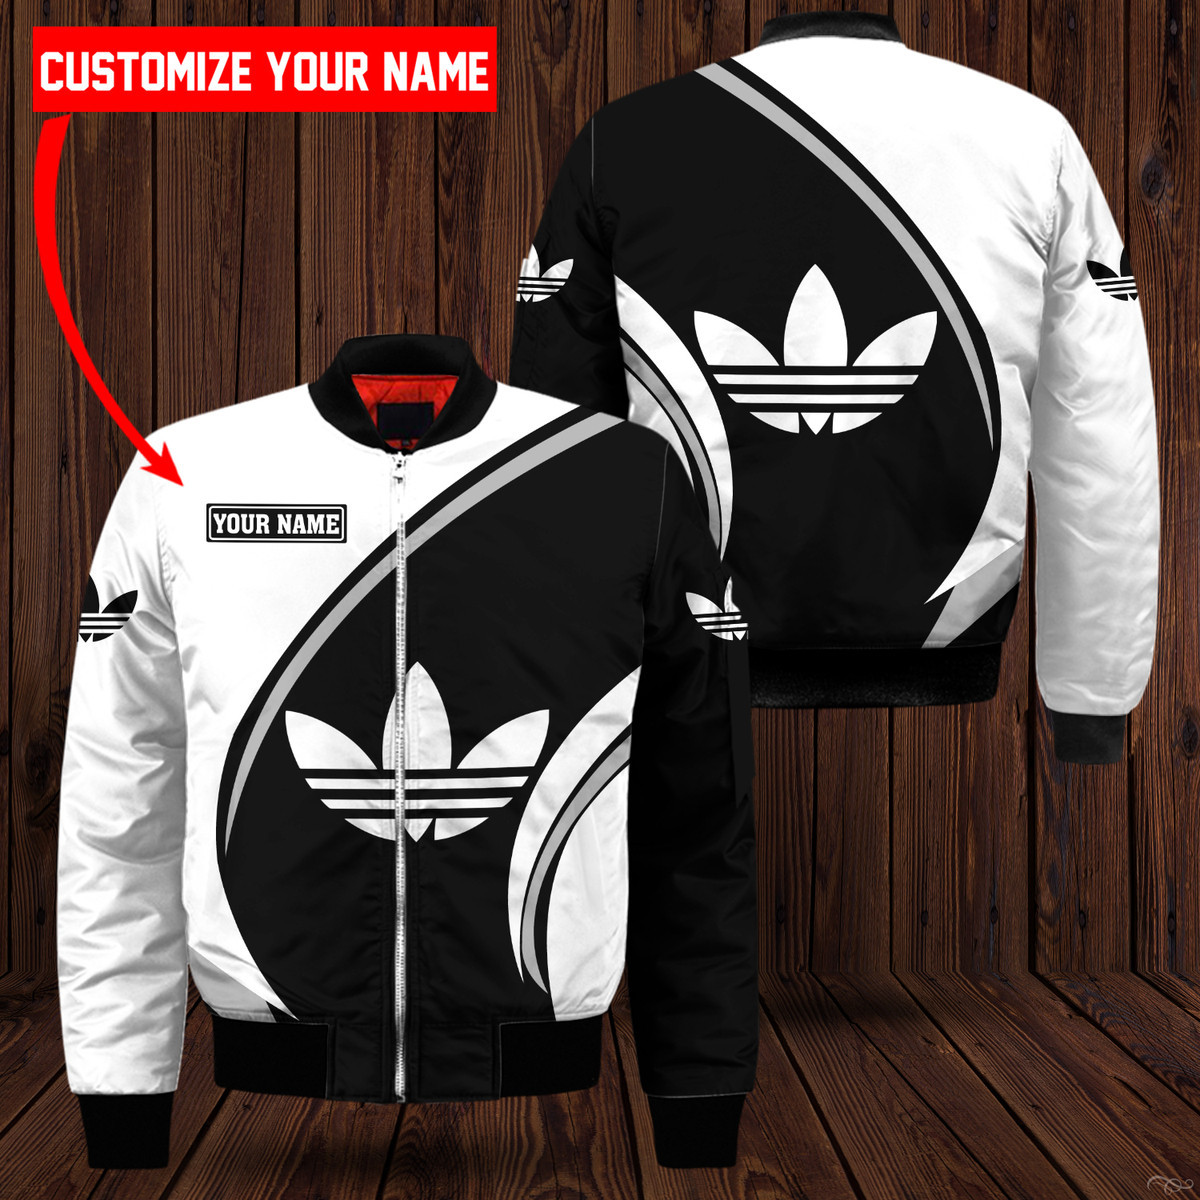 ADD Customize Name Bomber Jacket ADD5201 Ver 22 Bomber